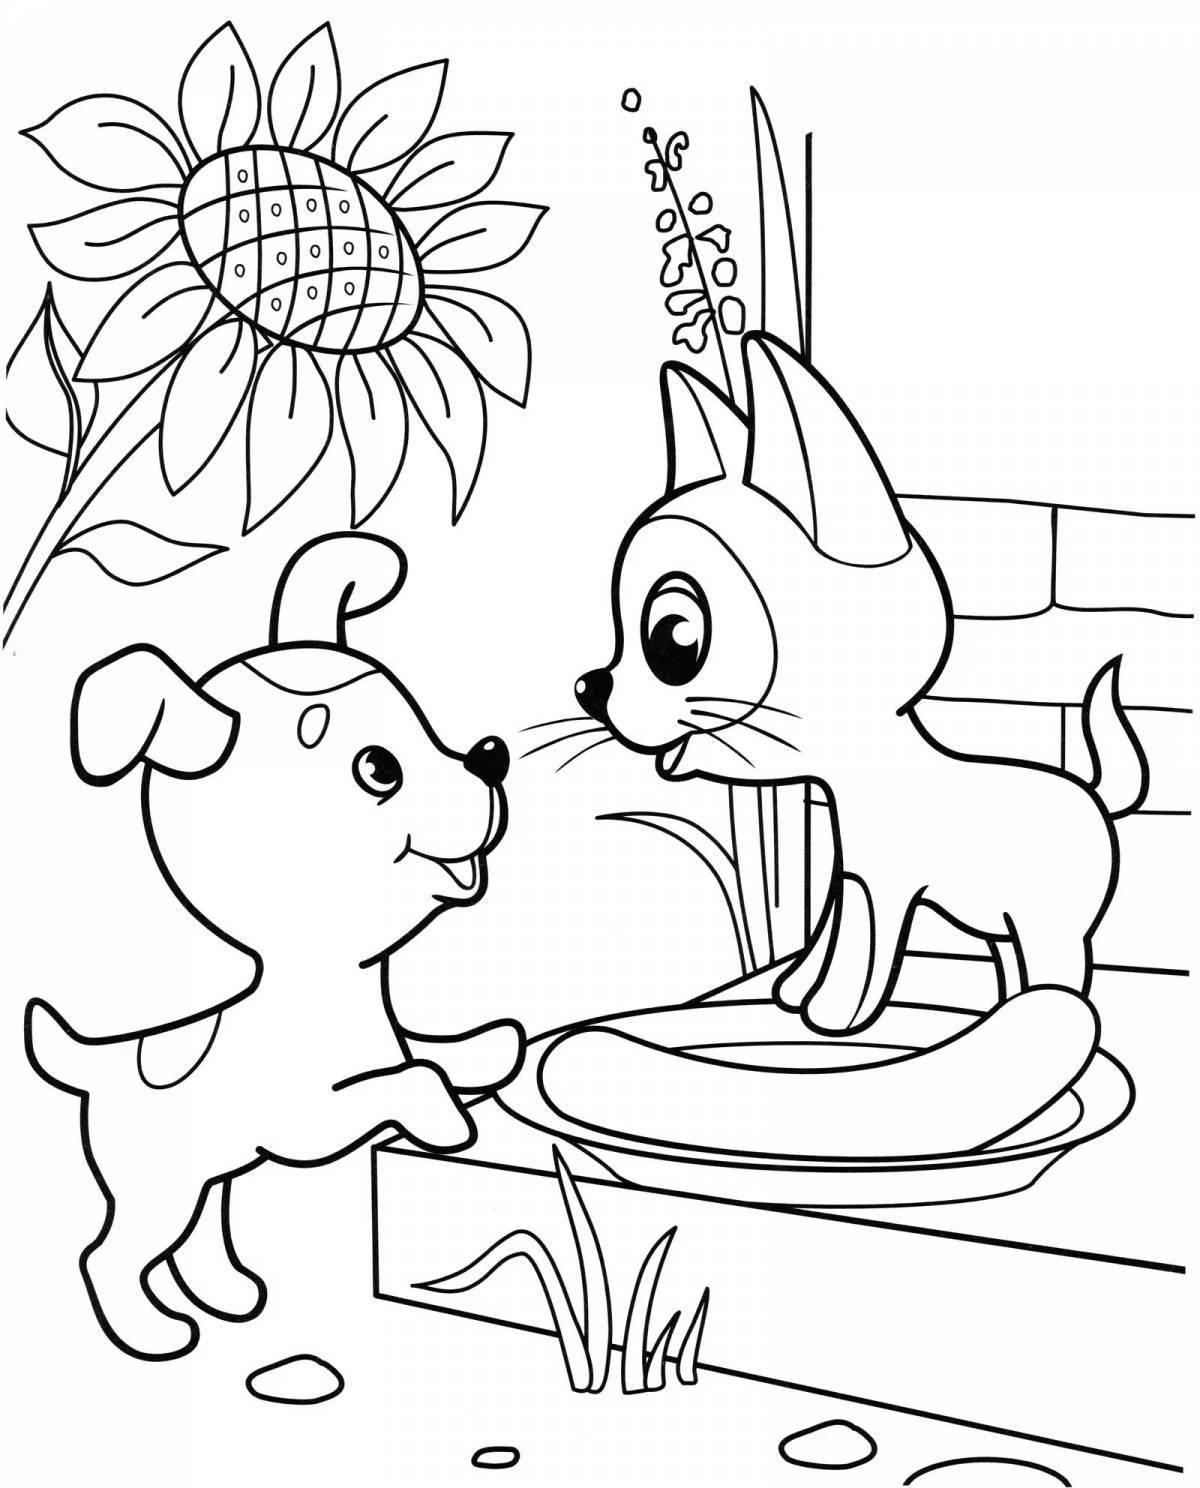 Colouring bright cats and dogs